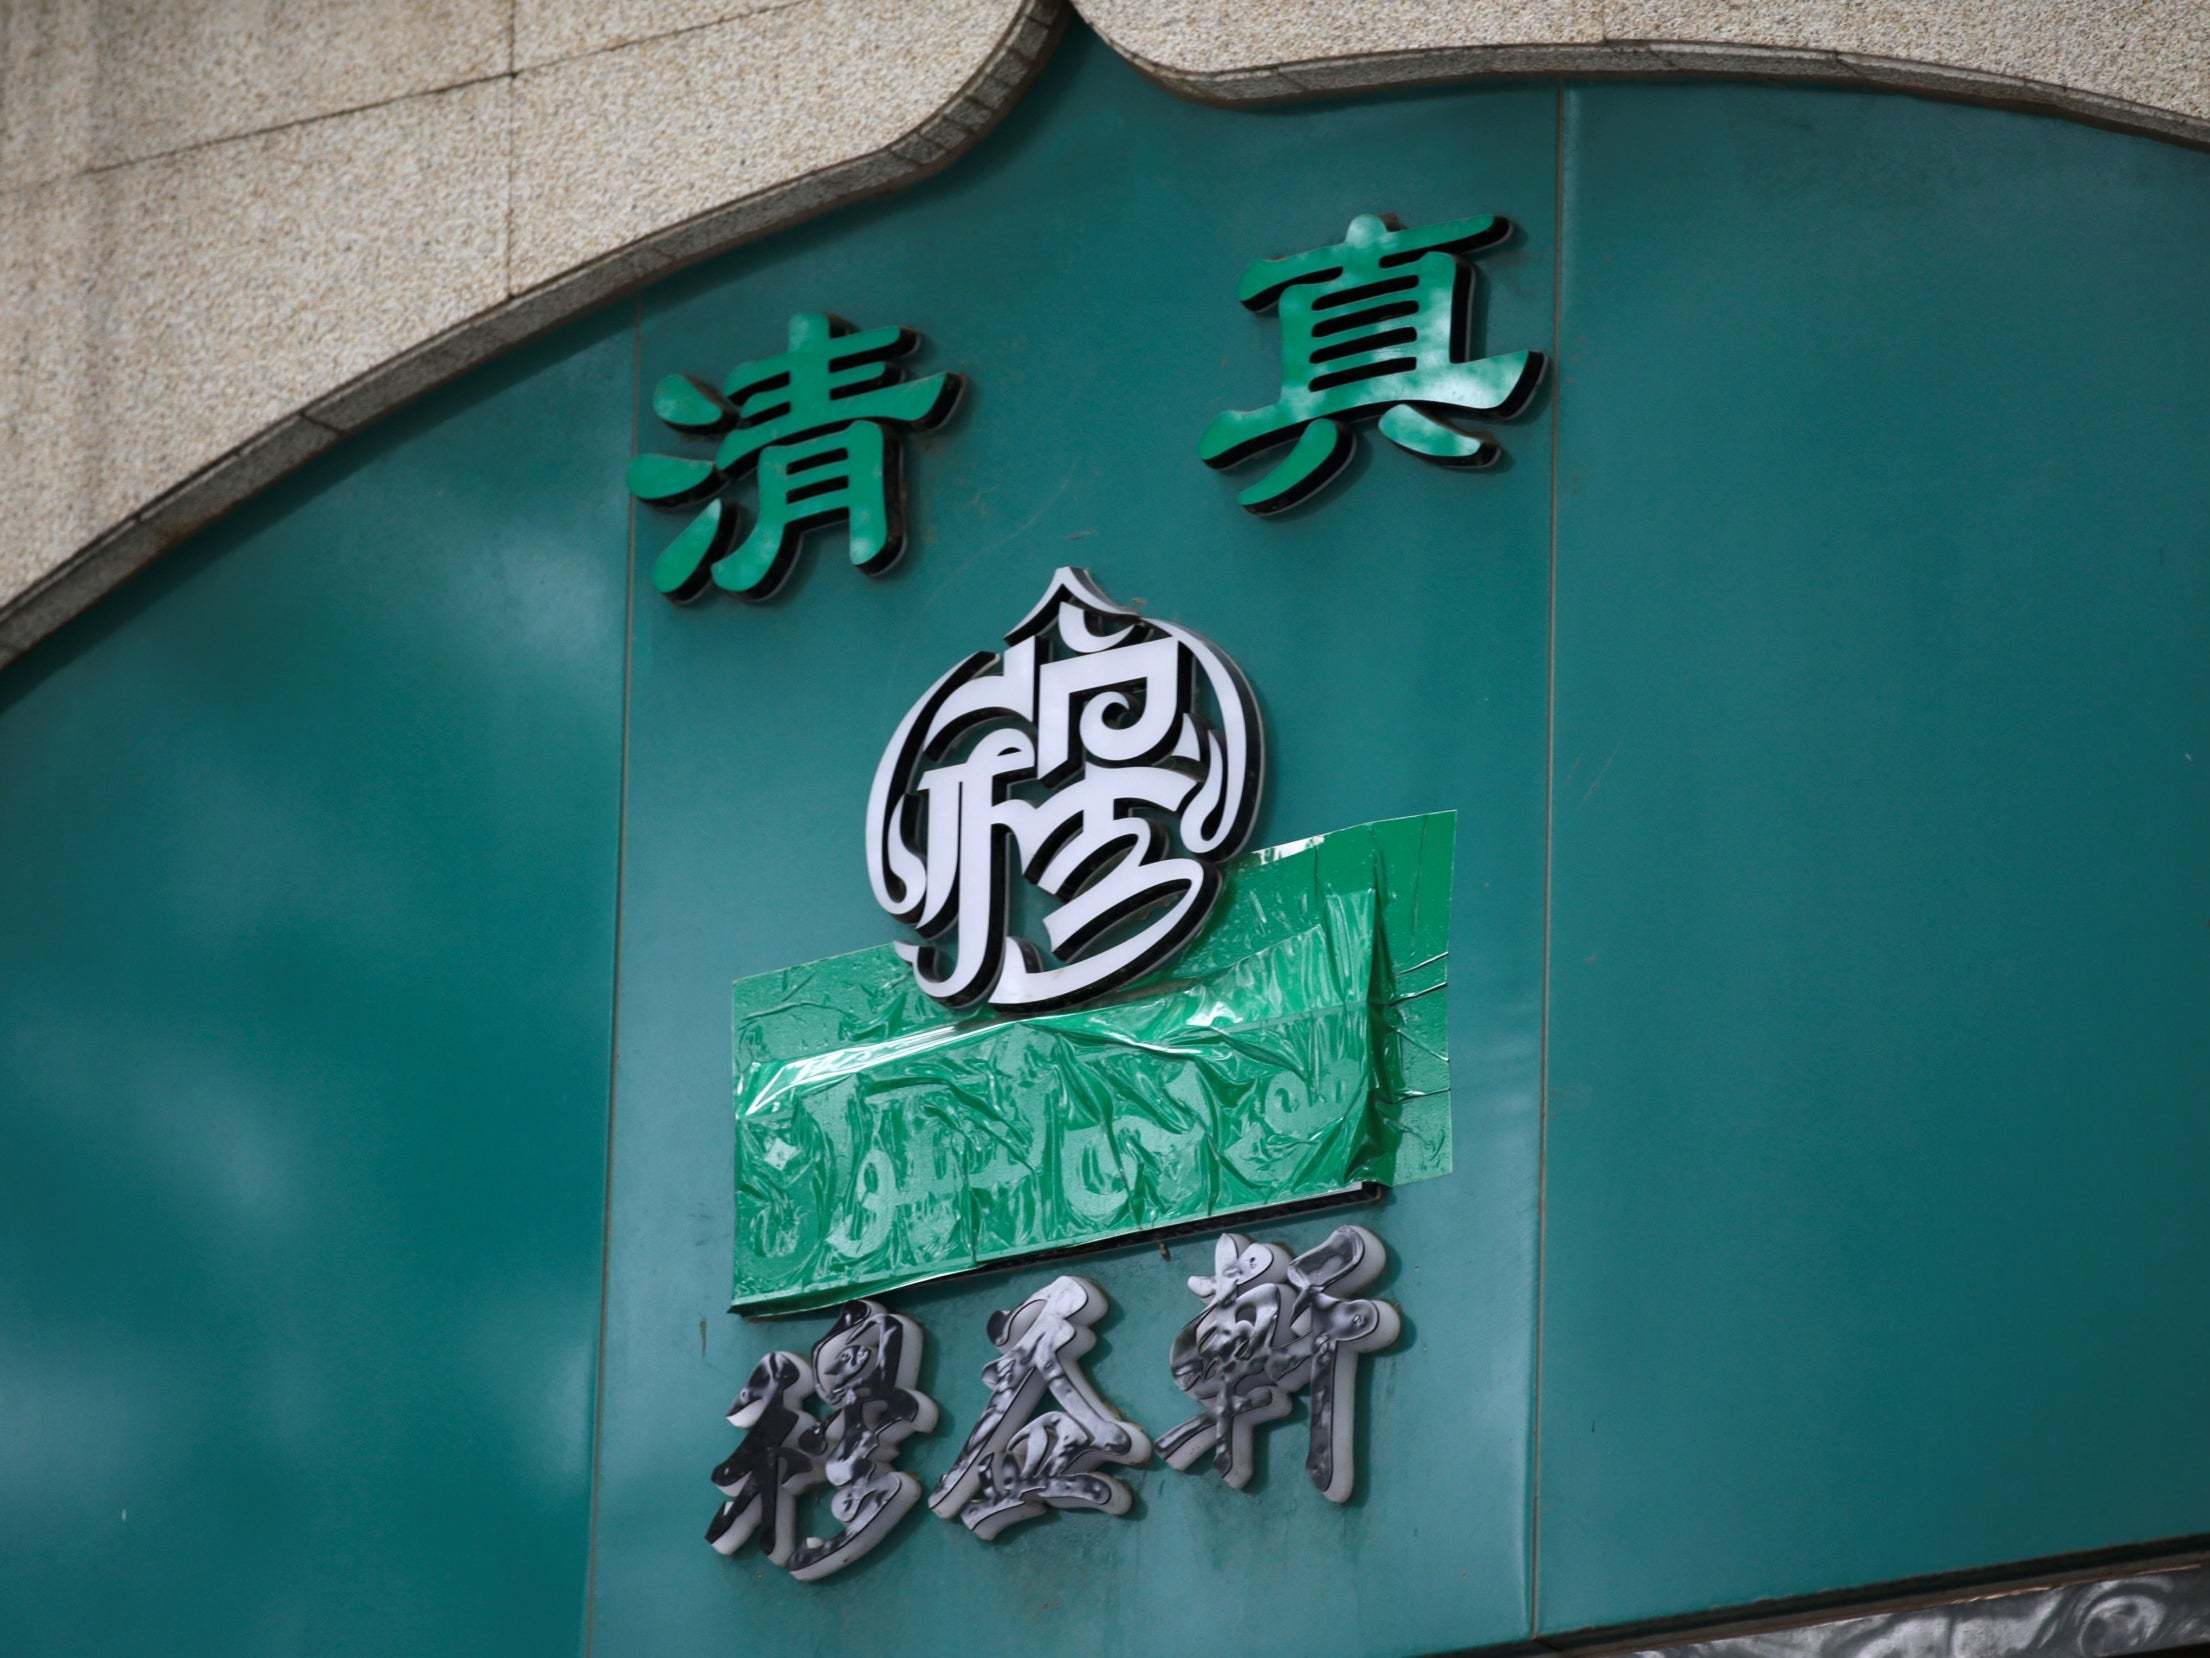 The Arabic script on the sign of a halal restaurant is covered up, in the Niujie neighbourhood of Beijing